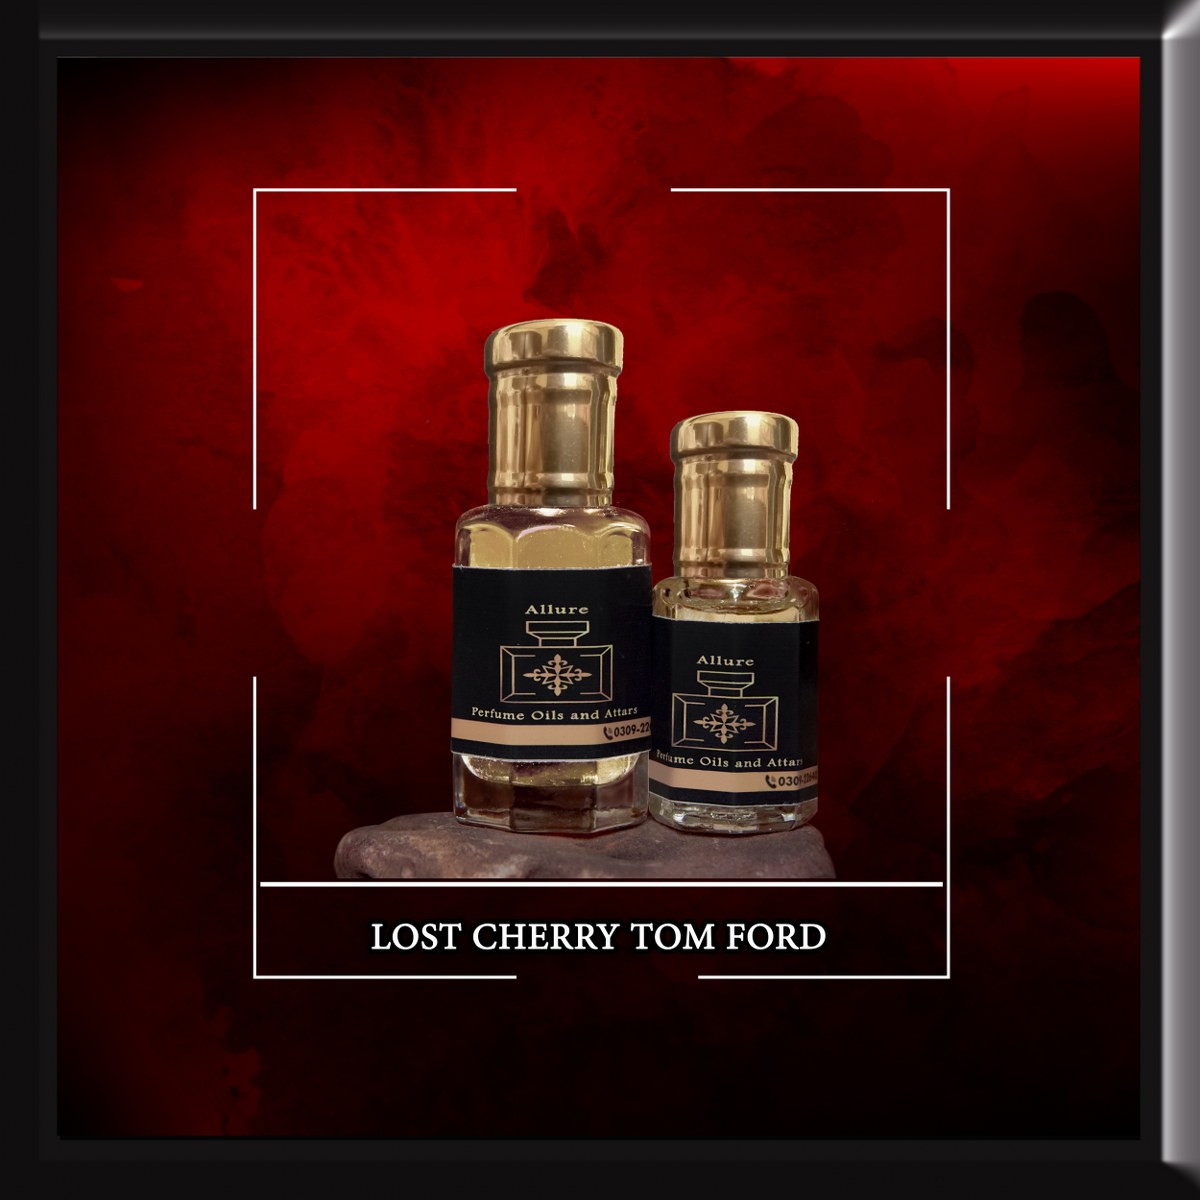 Lost Cherry Tom Ford Attar in high quality – Allure Perfume Oils and Attars